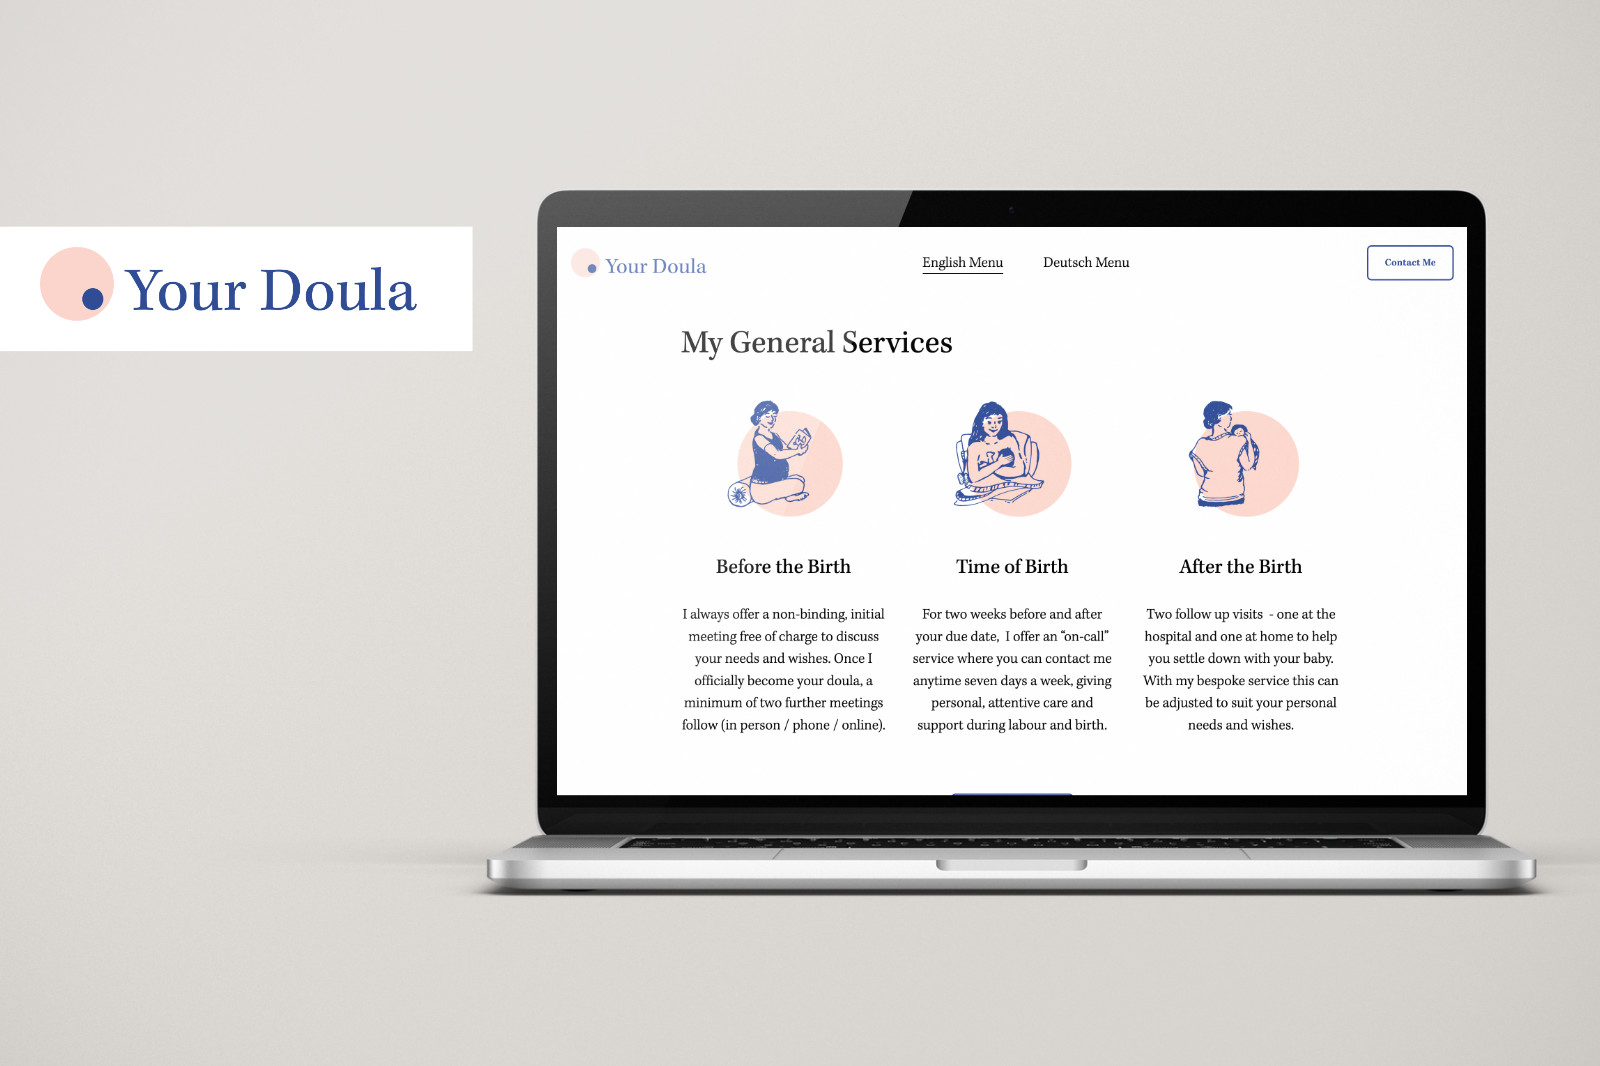 Logo and website design of the personal doula website Your Doula